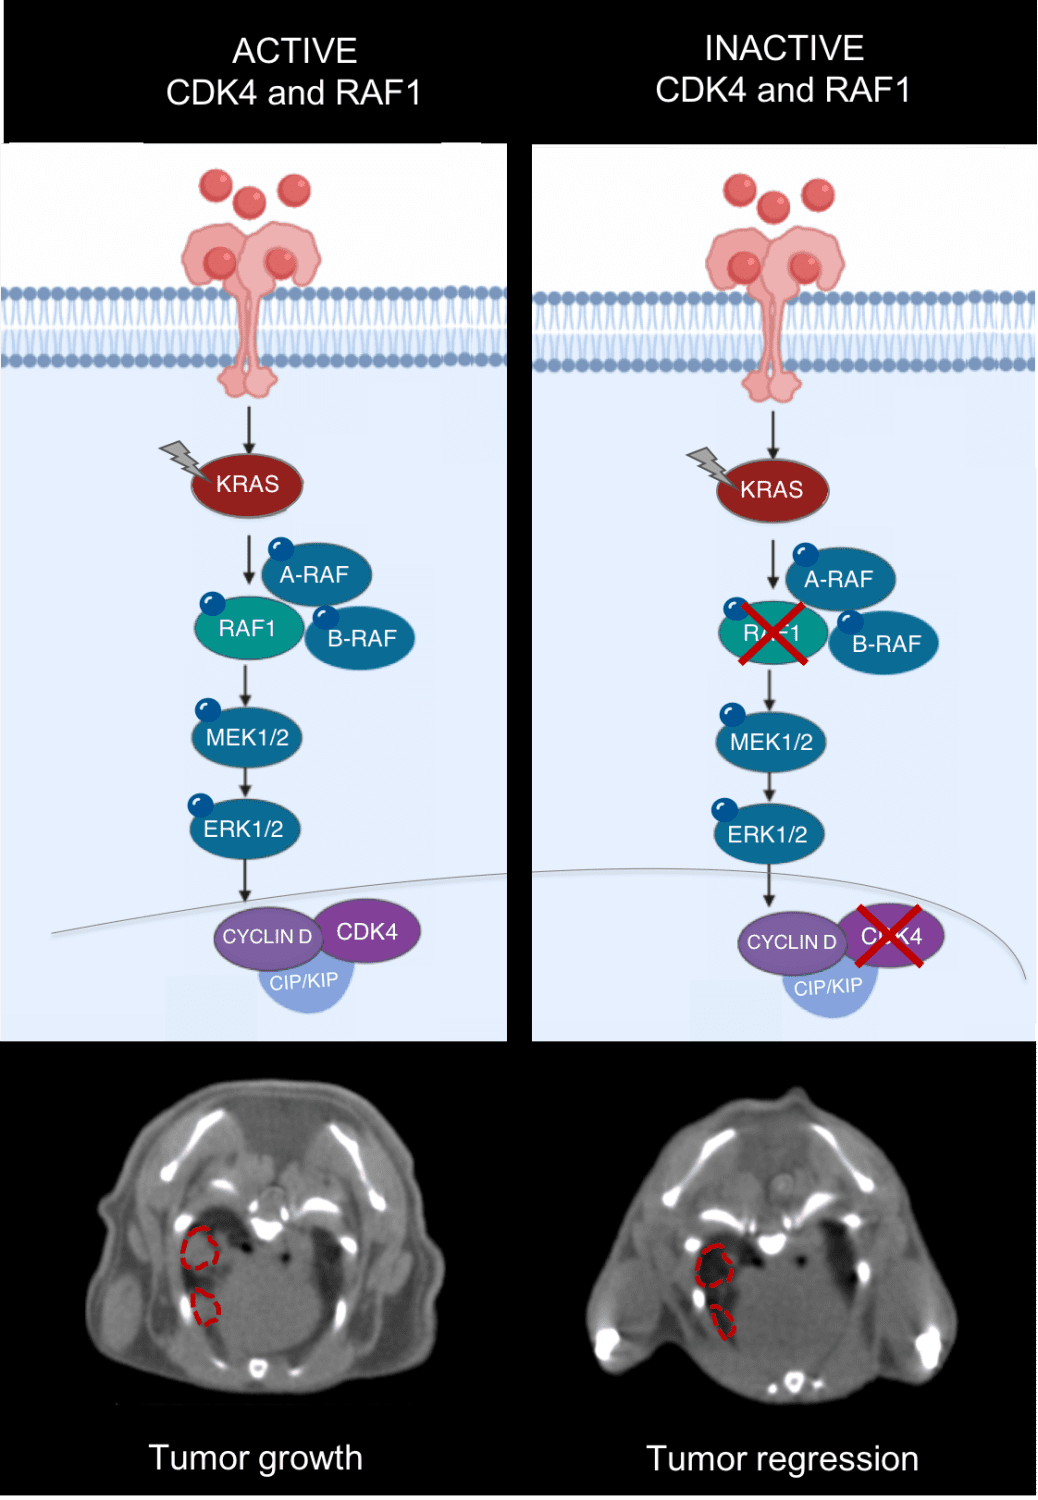 Illustration and Computed Tomography image of the therapeutic effect before and after CDK4 and RAF1 inactivation. On the left two tumors can be observed when KRAS is activating the downstream CDK4 and RAF1. On the right, the same tumours disappearing upon CDK4 and RAF1 inactivation. <b>/CNIO</b>